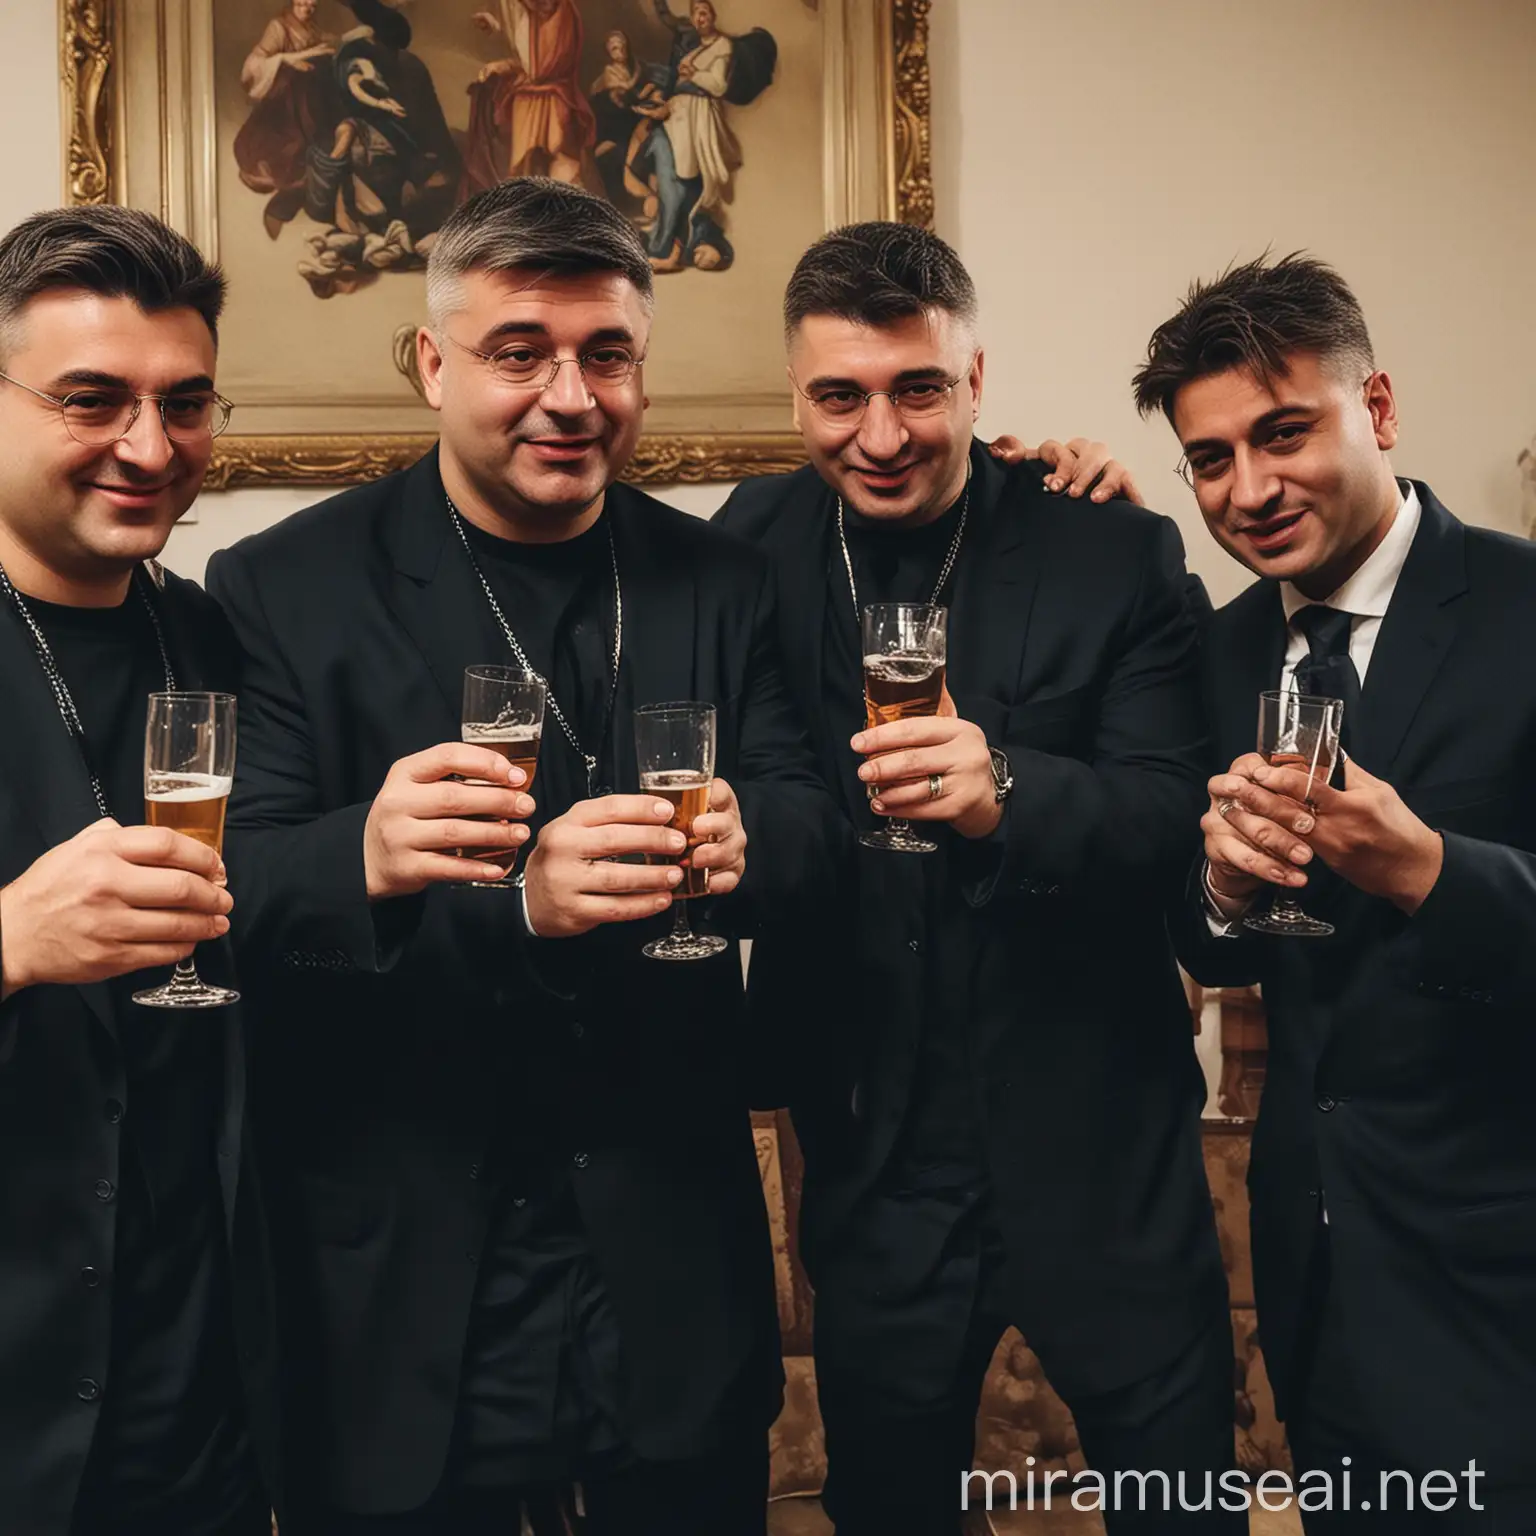 croatian prime minister and his collegues as hip hop artists, drinking rapping, andrej plenkovic